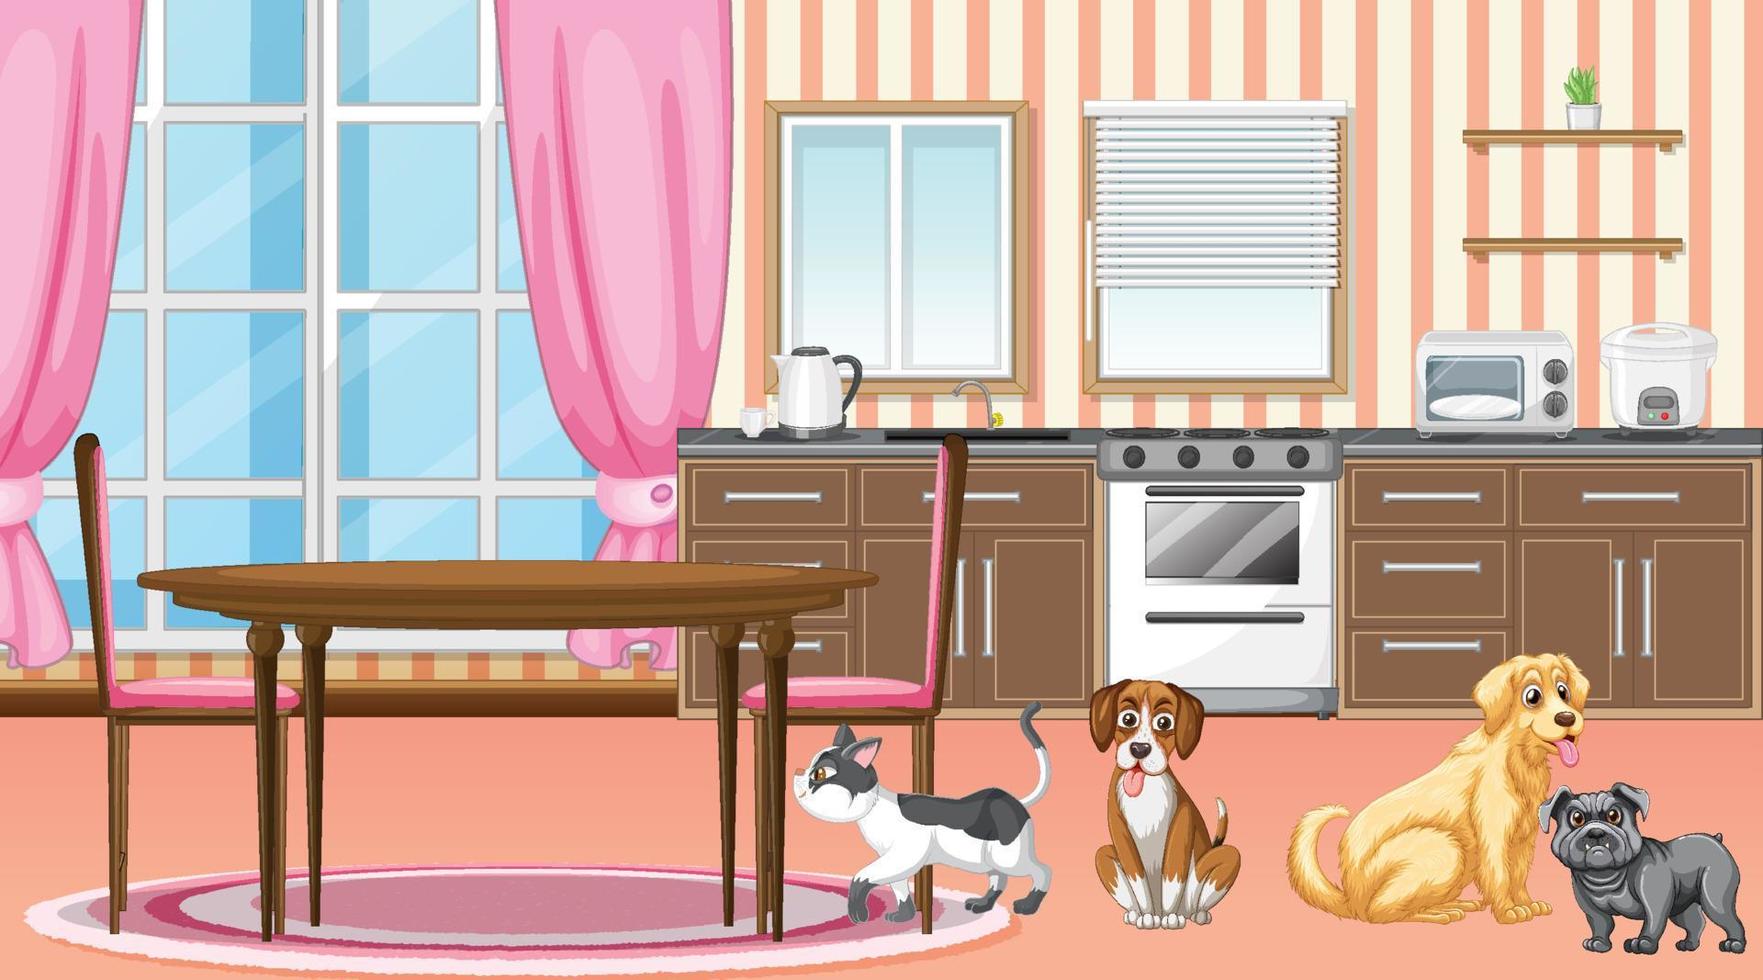 Set of different domestic animals in kitchen vector